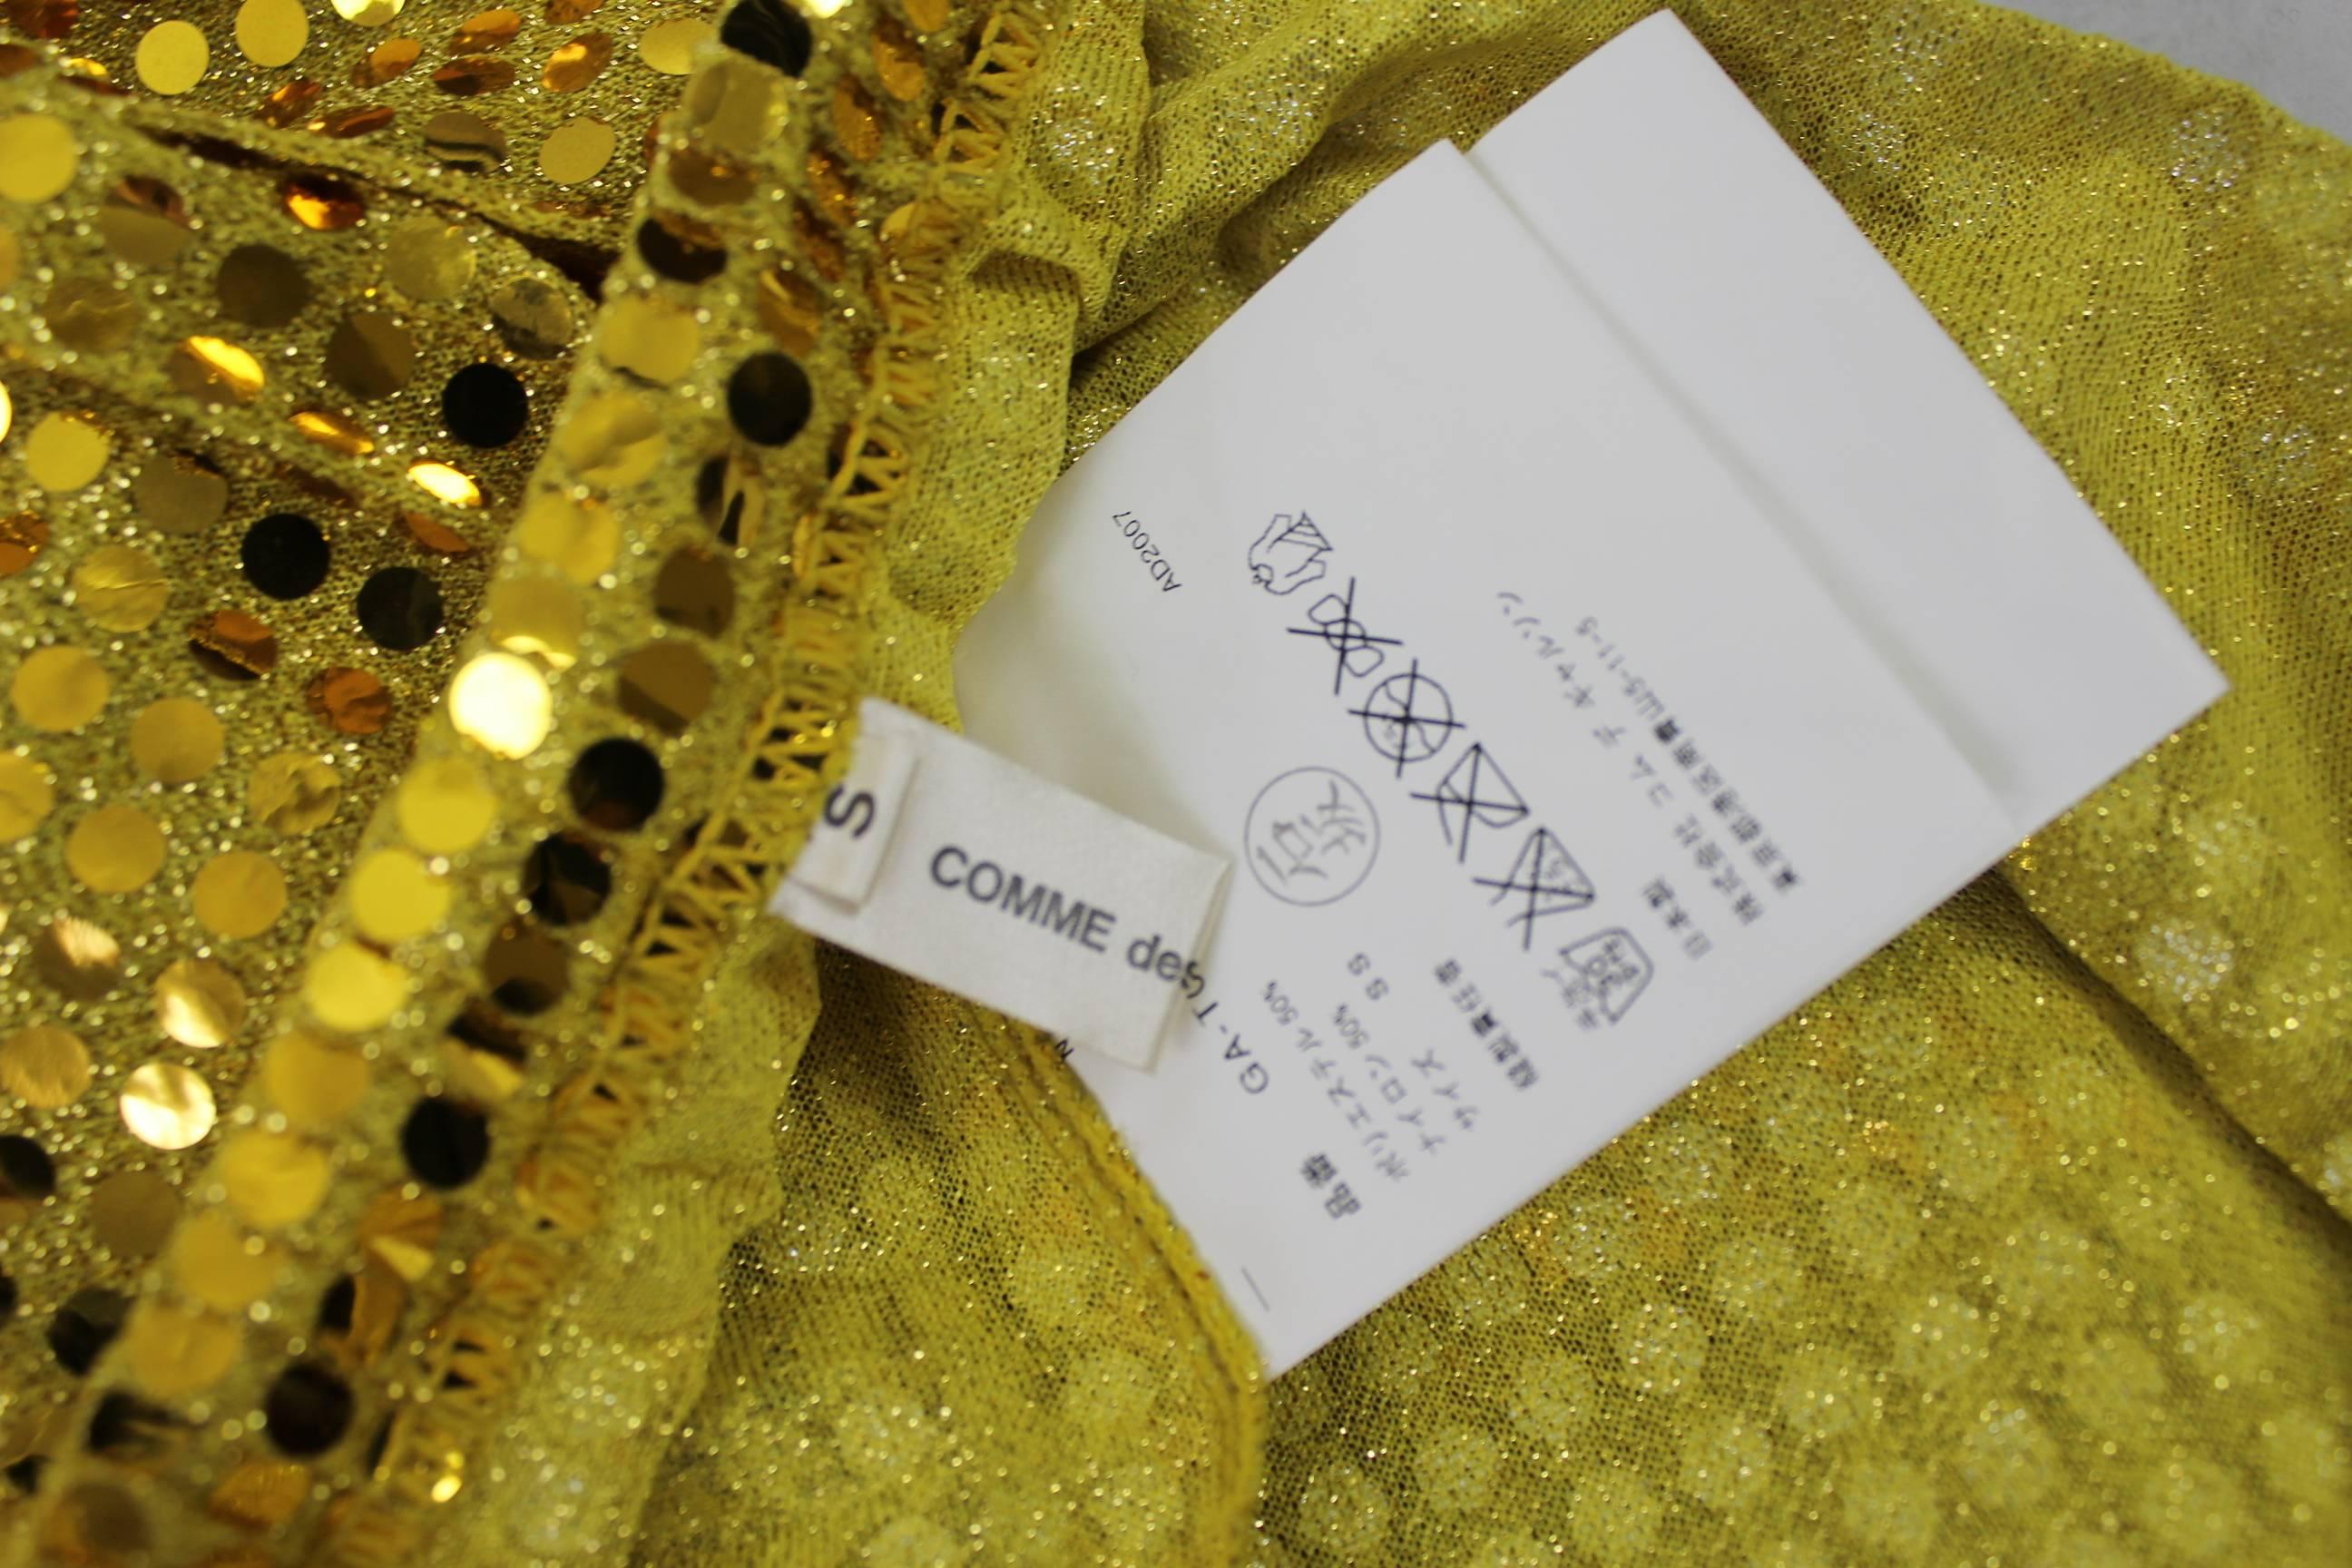 Comme des Garcons AD 2007 Gold Sequin Flat Top and Skirt 4